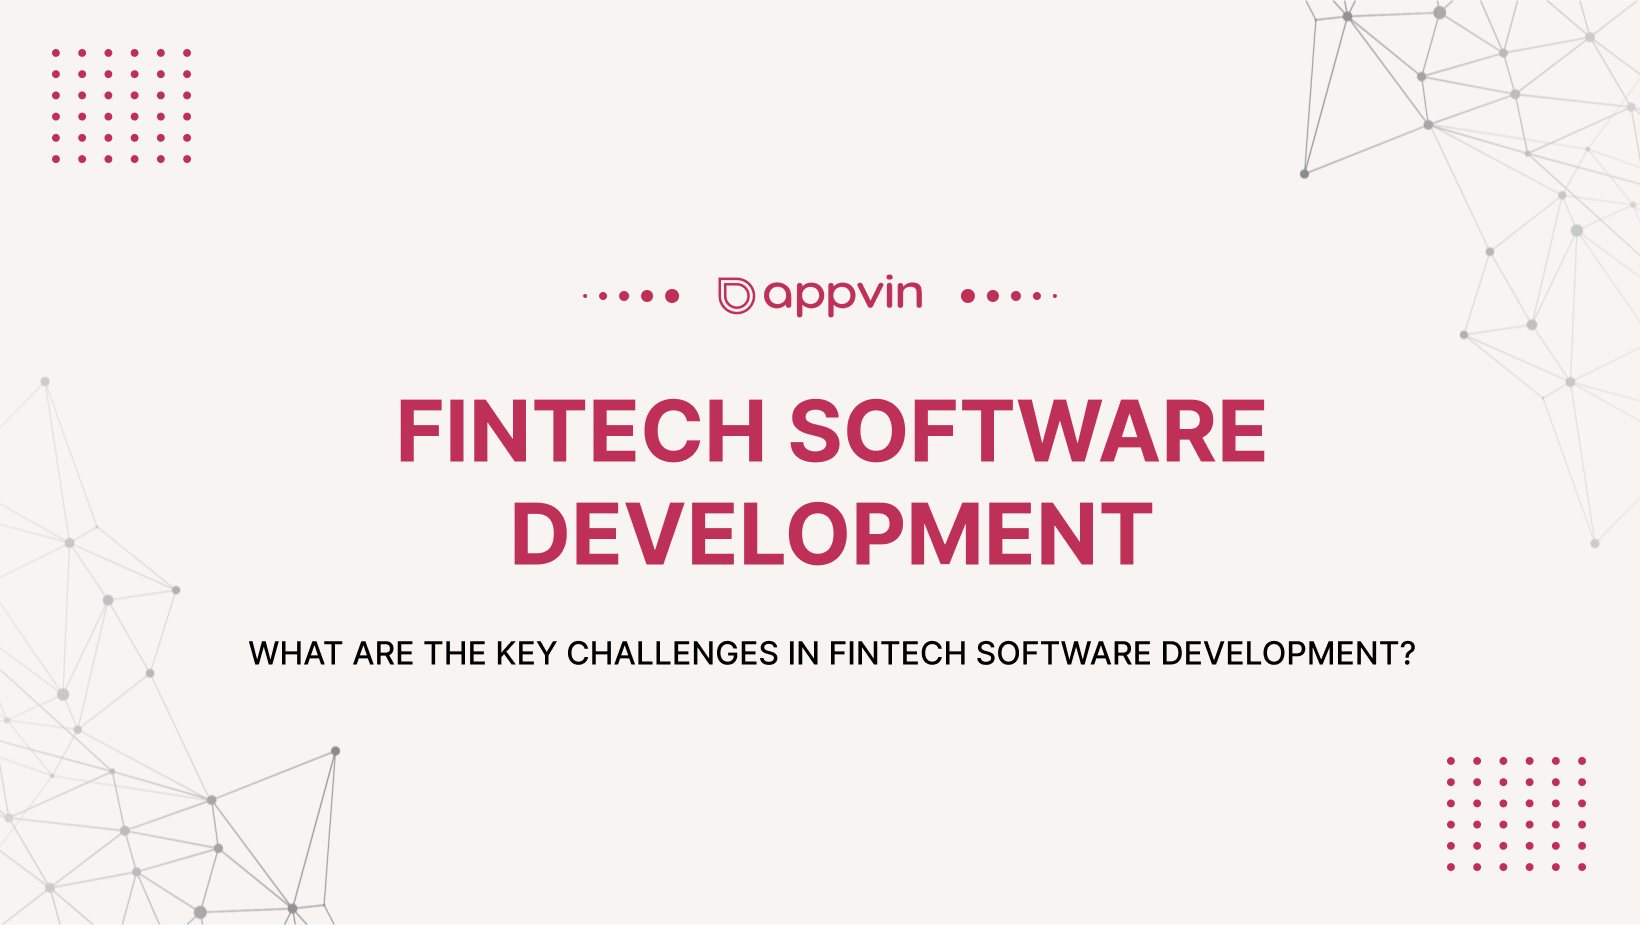 What are the key challenges in FinTech software development?